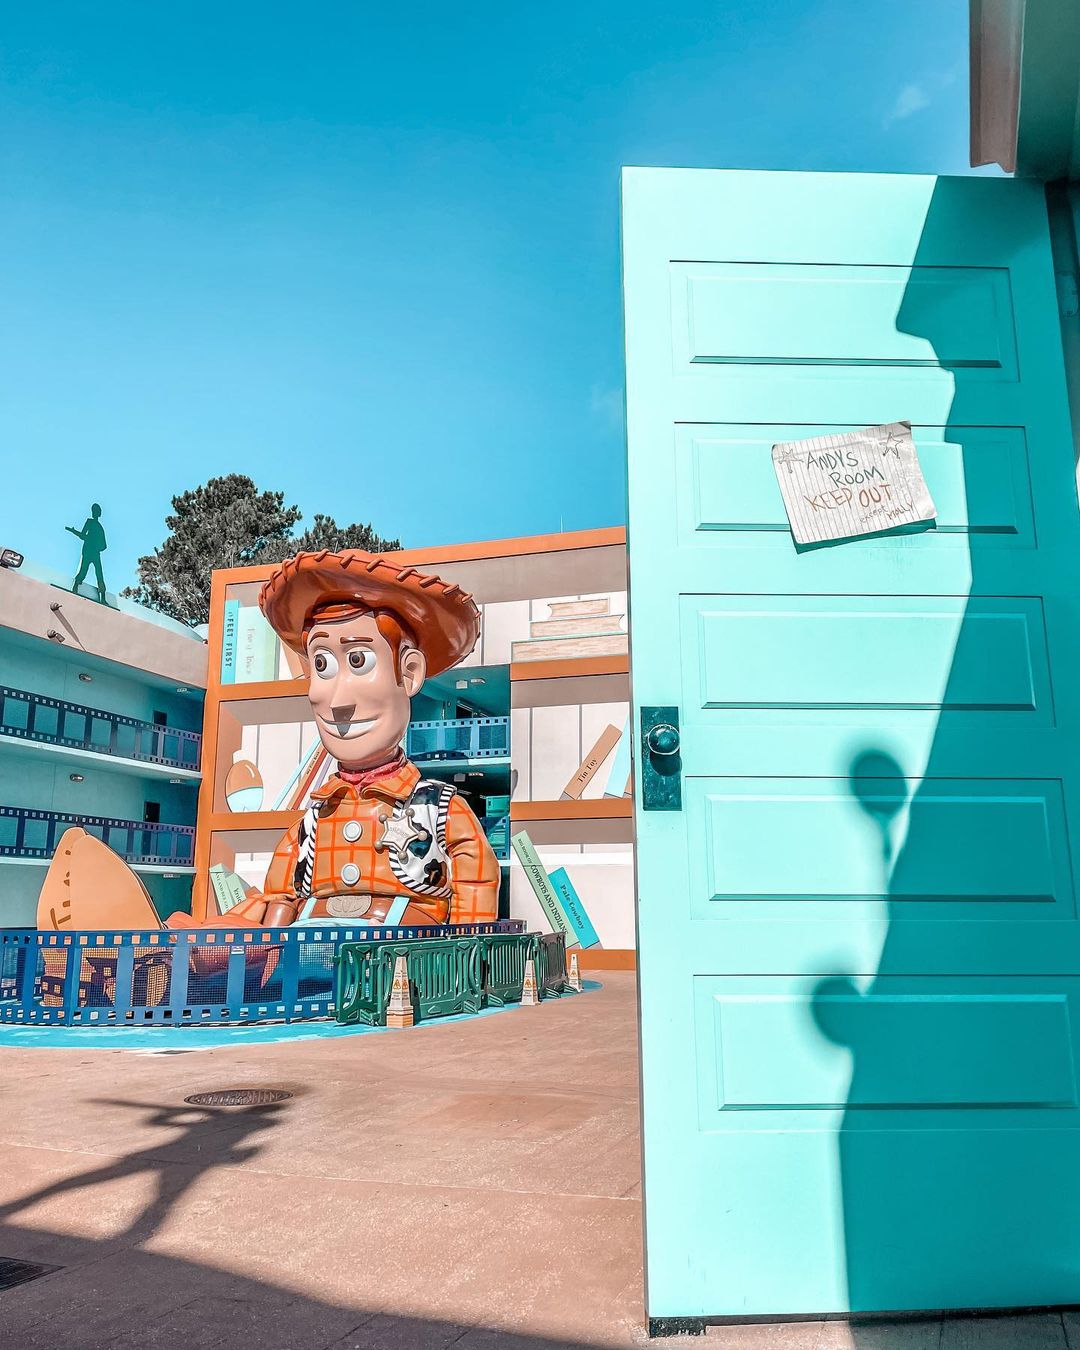 Toy Story Area at Disney's All Star Movies